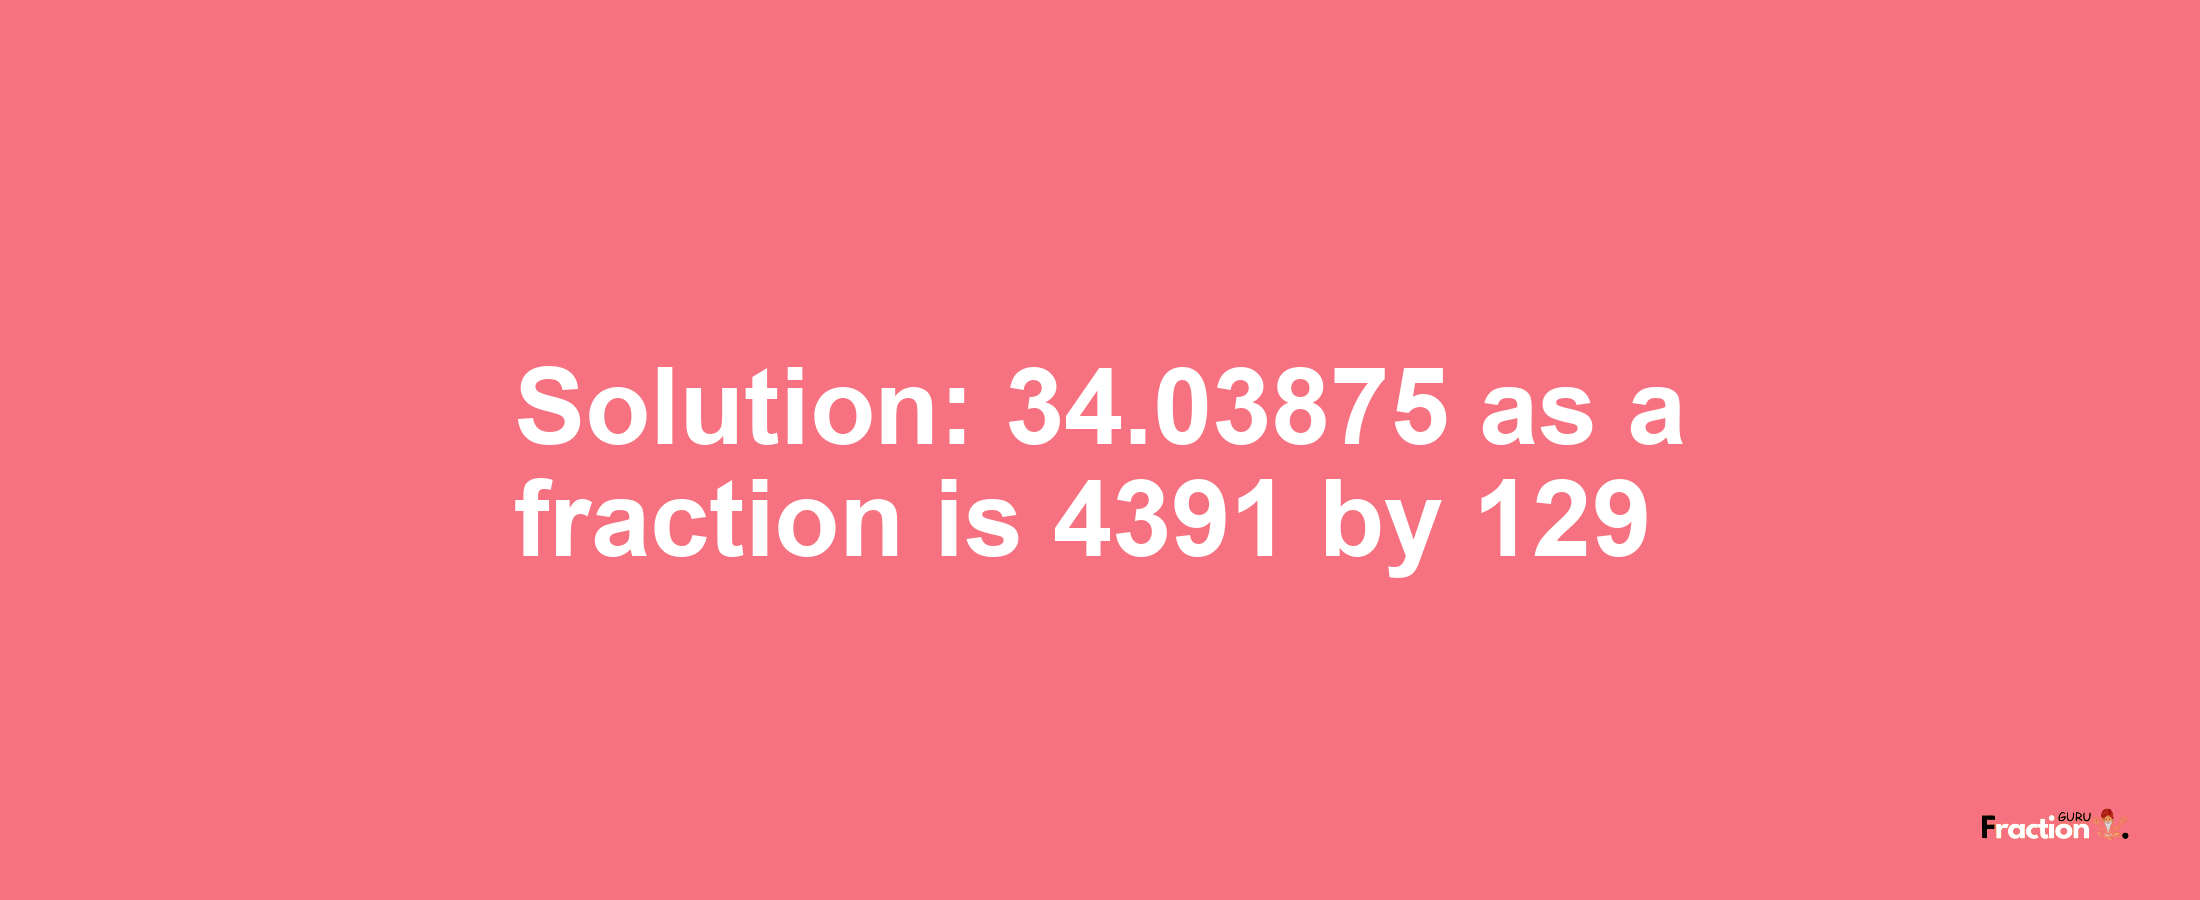 Solution:34.03875 as a fraction is 4391/129